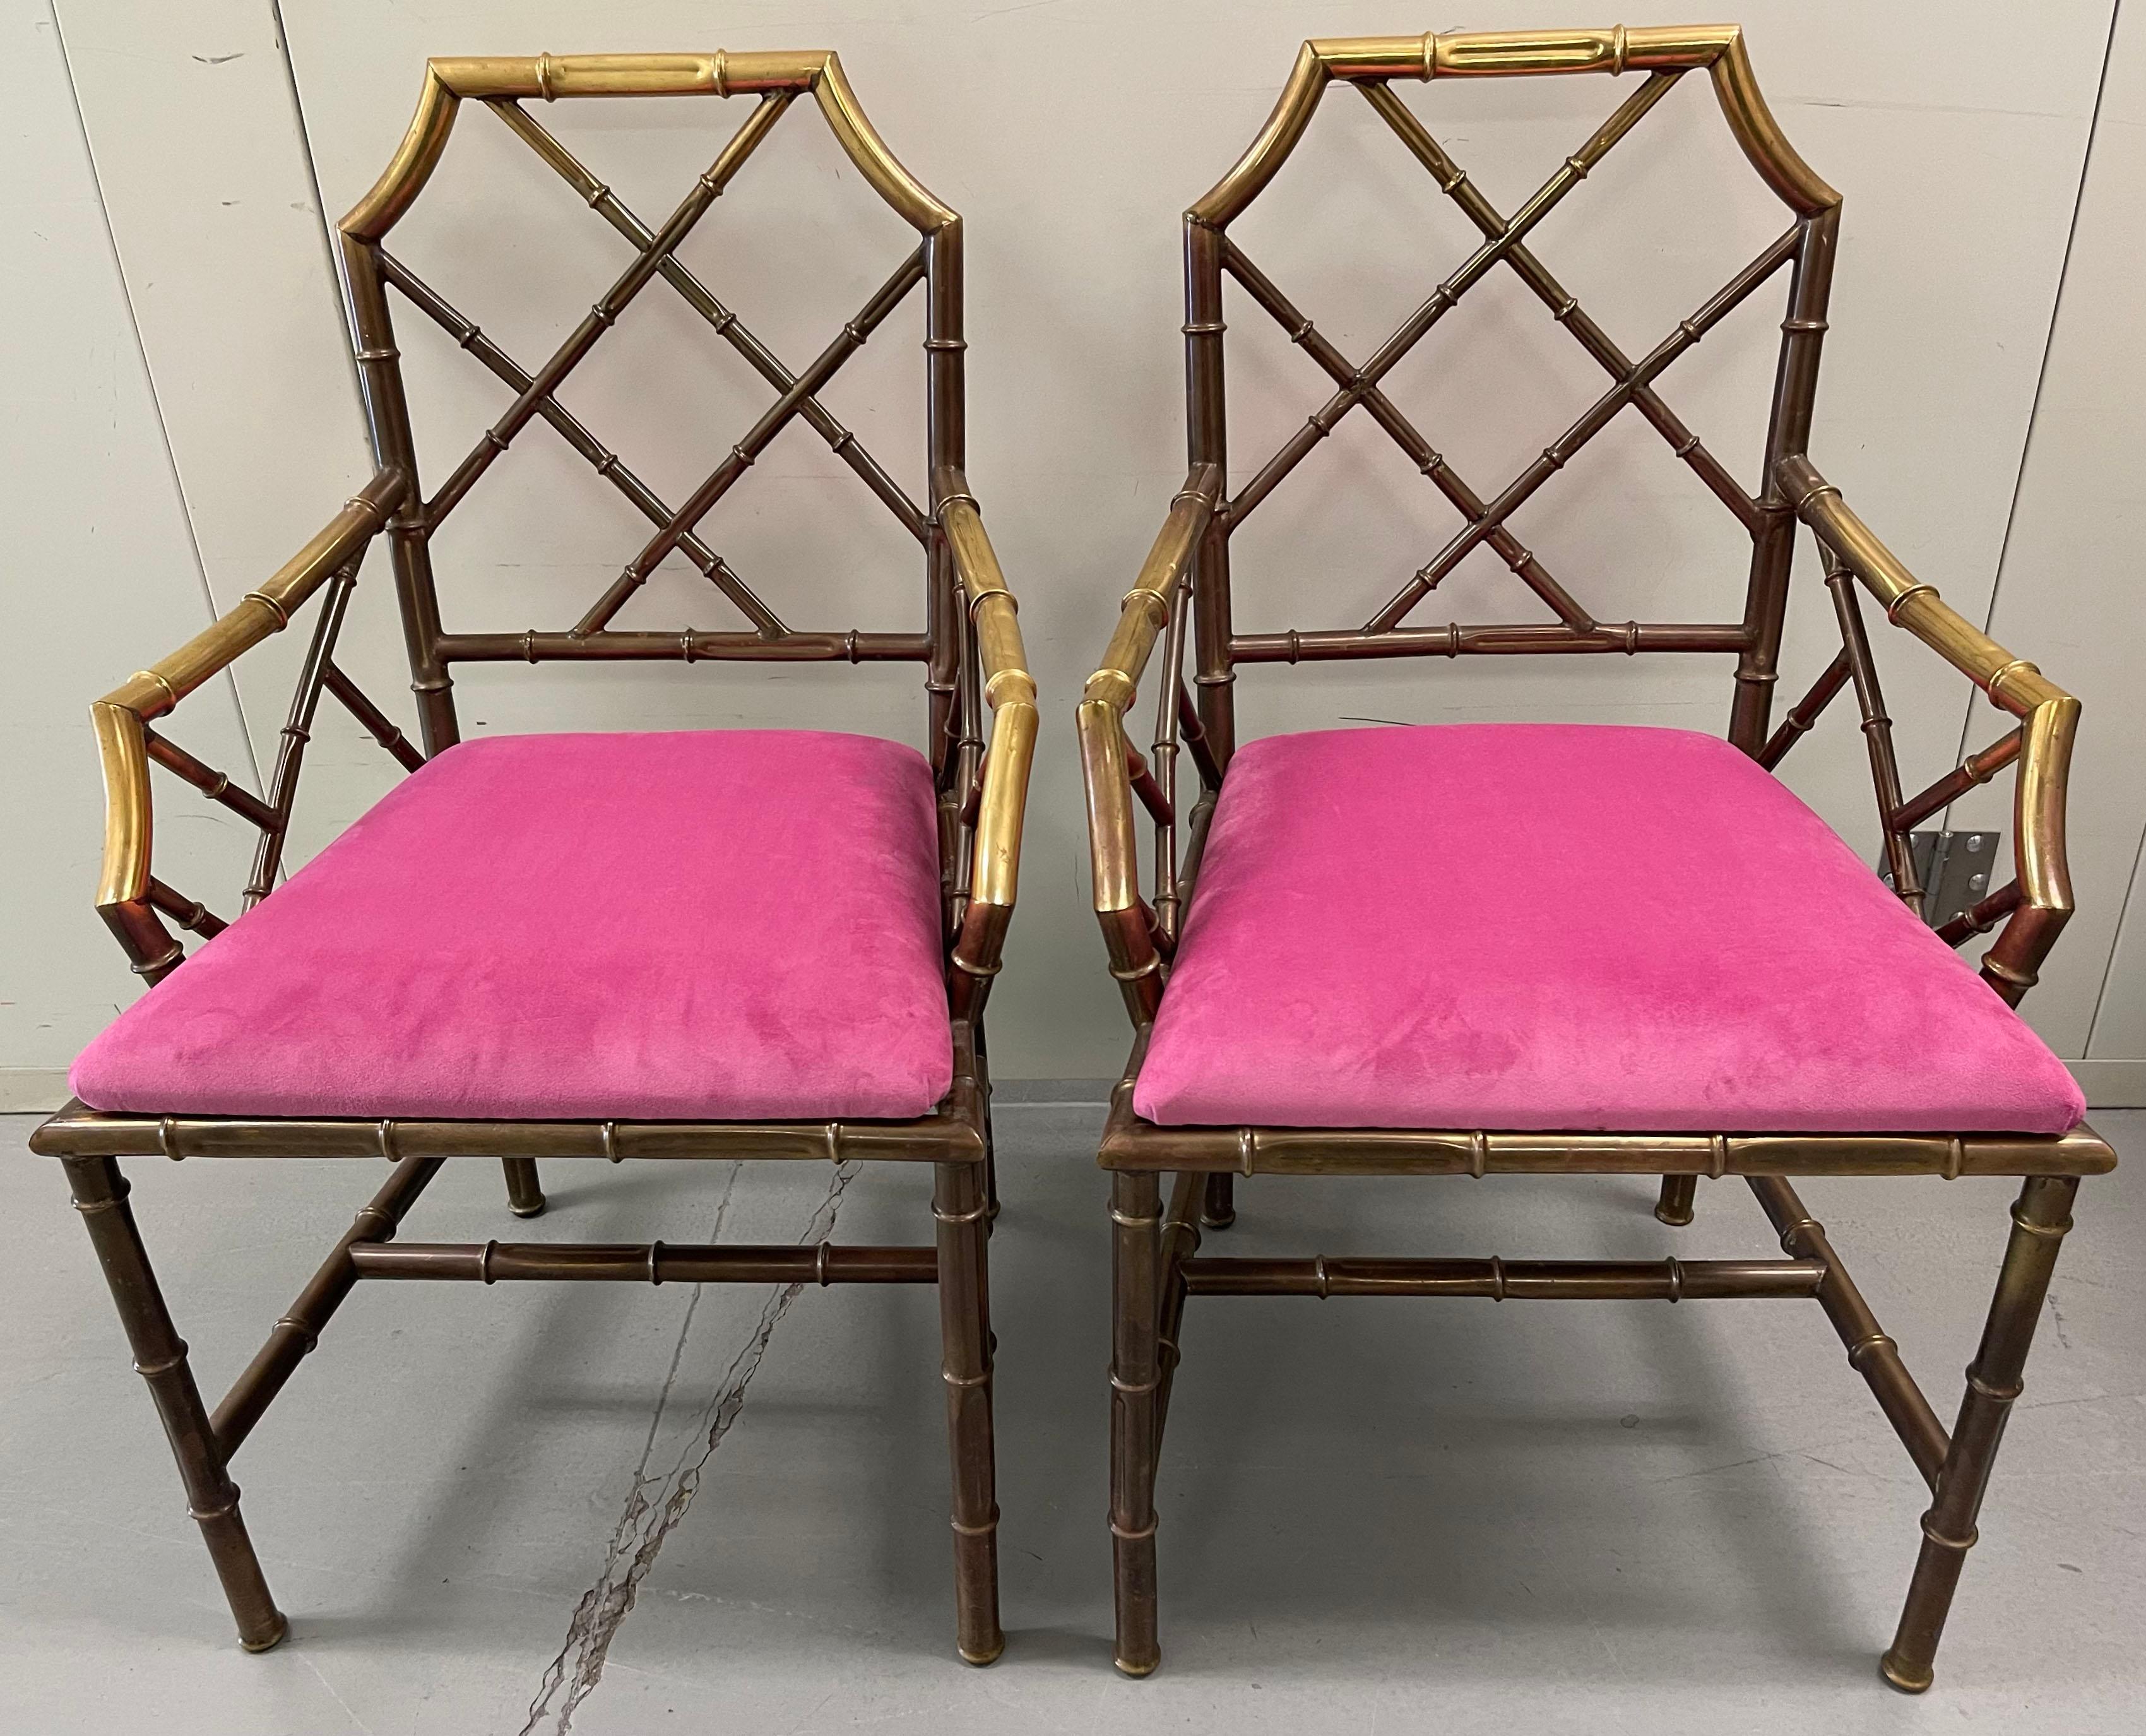 Pair of 1970s brass bamboo armchairs or dining chairs. Polished brass finish with all-over age related patina and wear. Newly upholstered in pink velvet fabric. Chairs are stamped Made in Italy on the underside.
Measures: Seat is 20